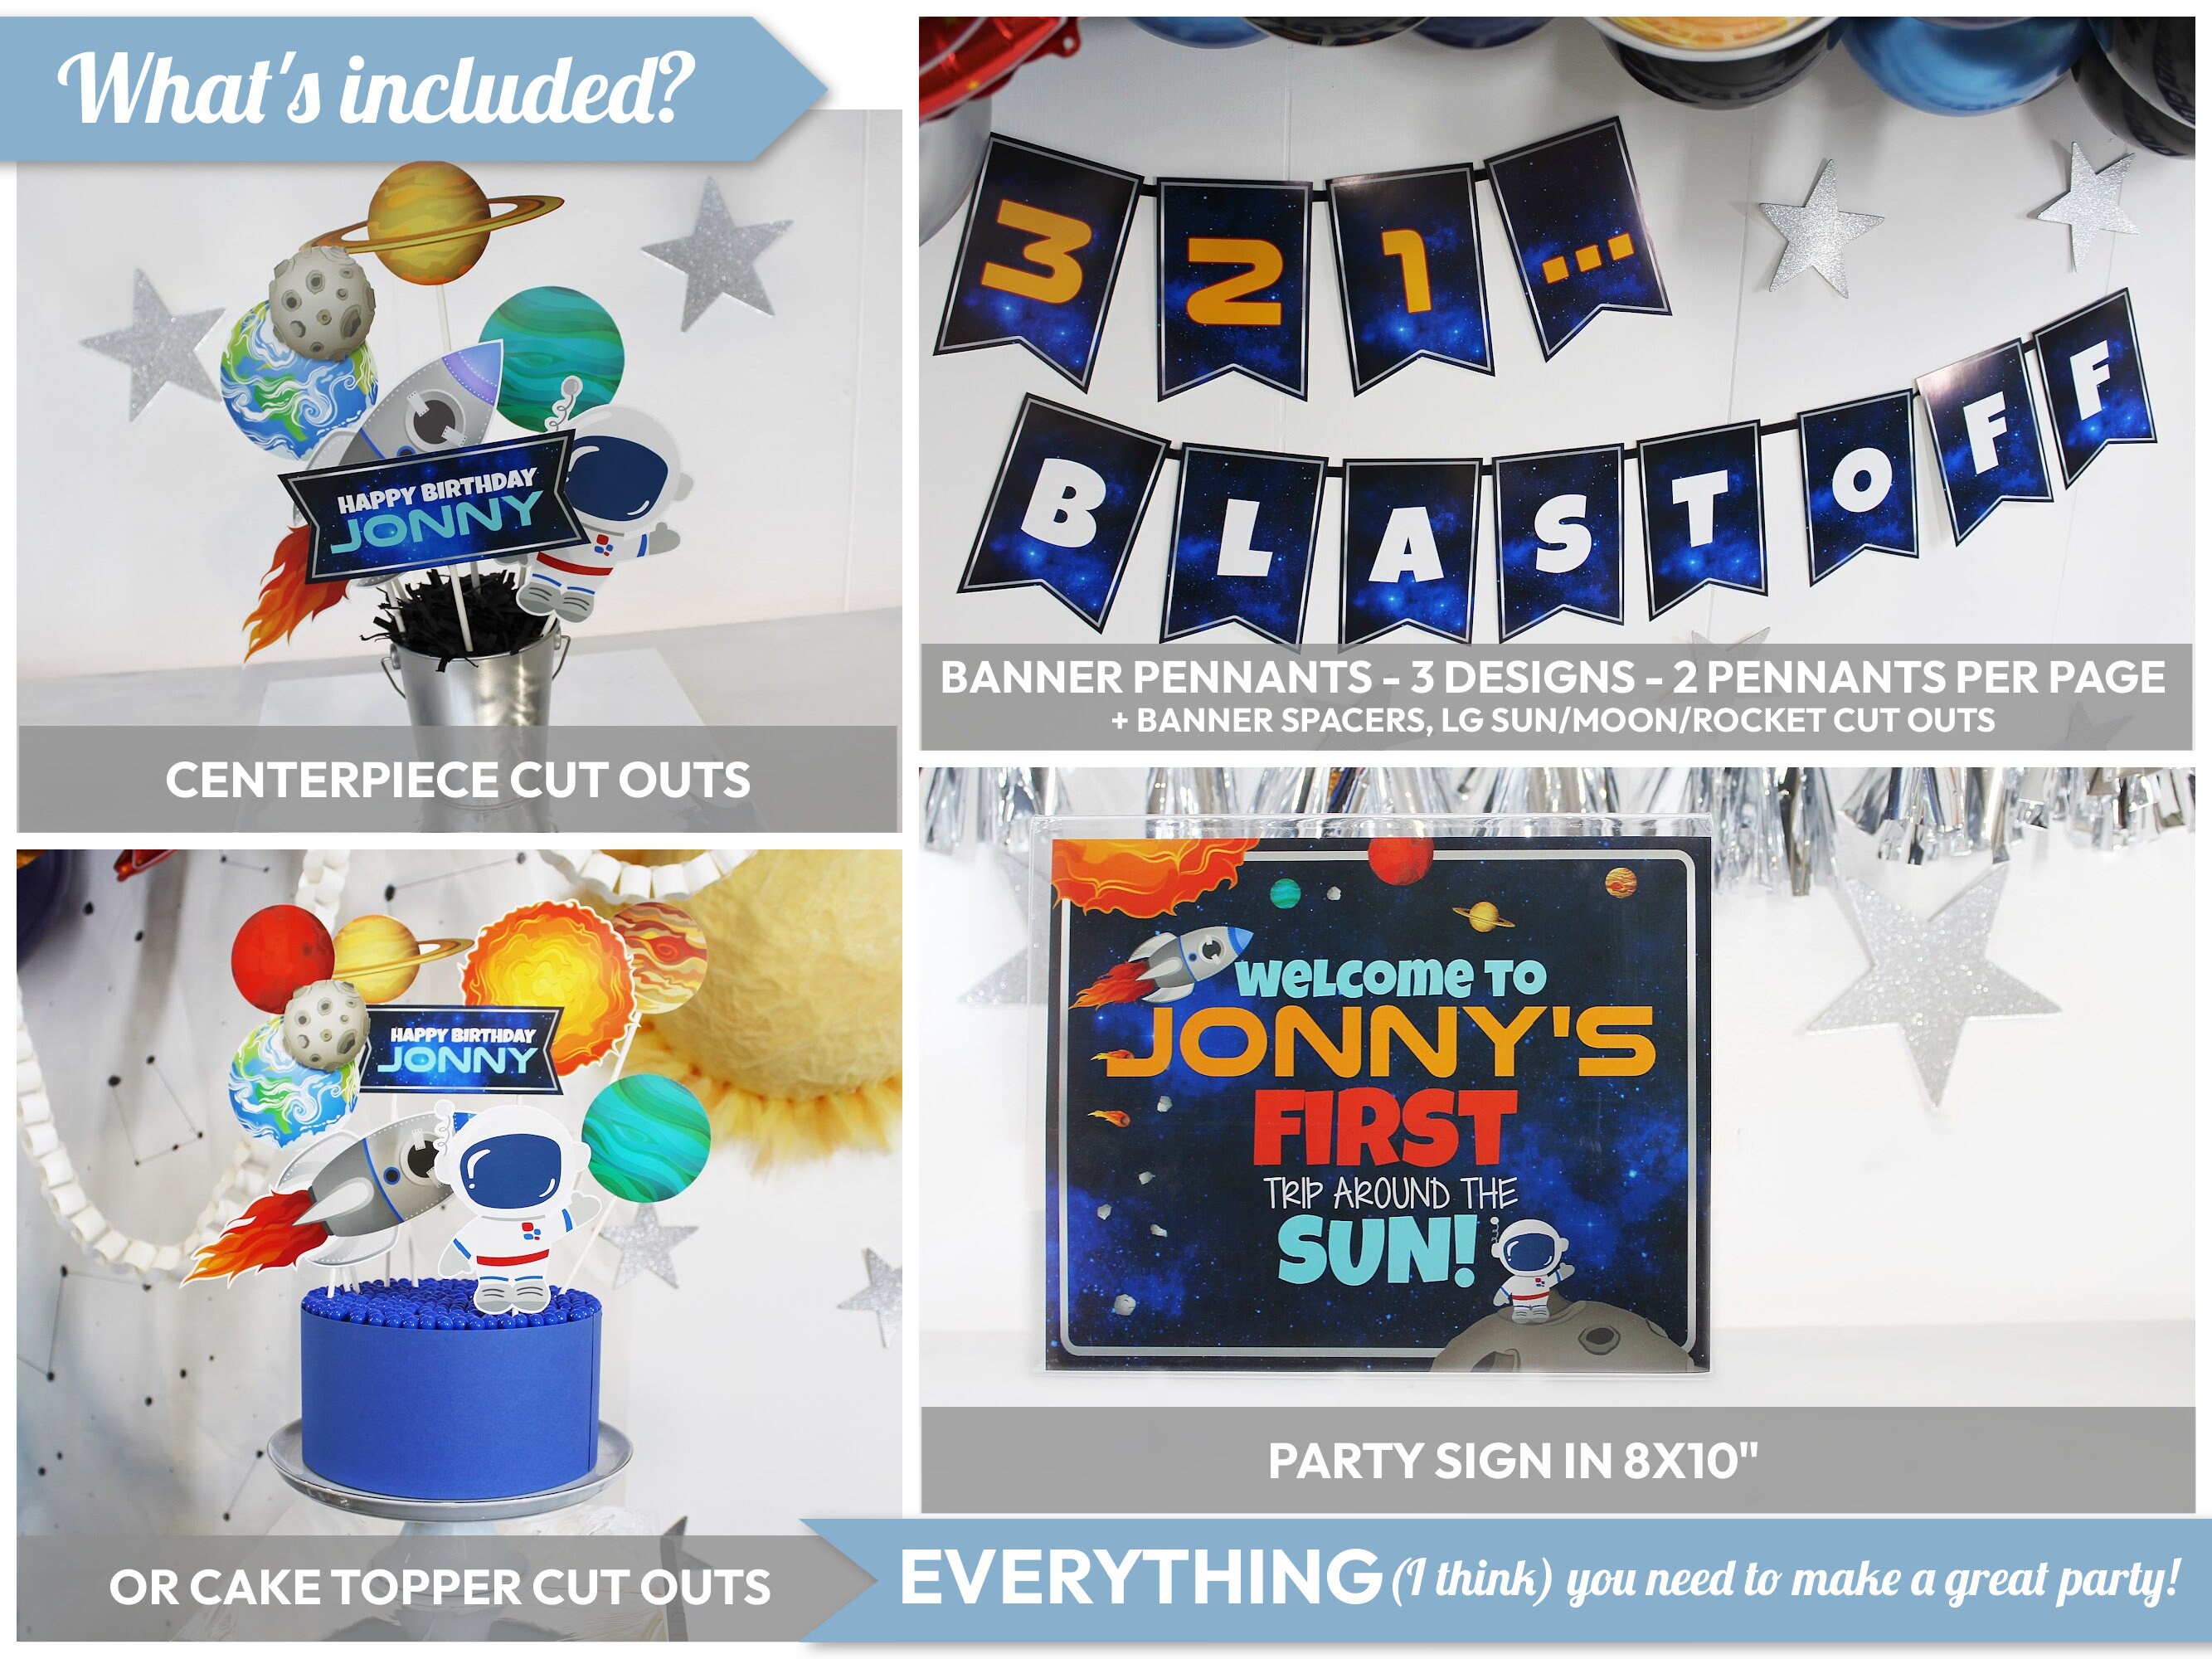 Space Birthday Decorations Astronaut Party First Trip Around the